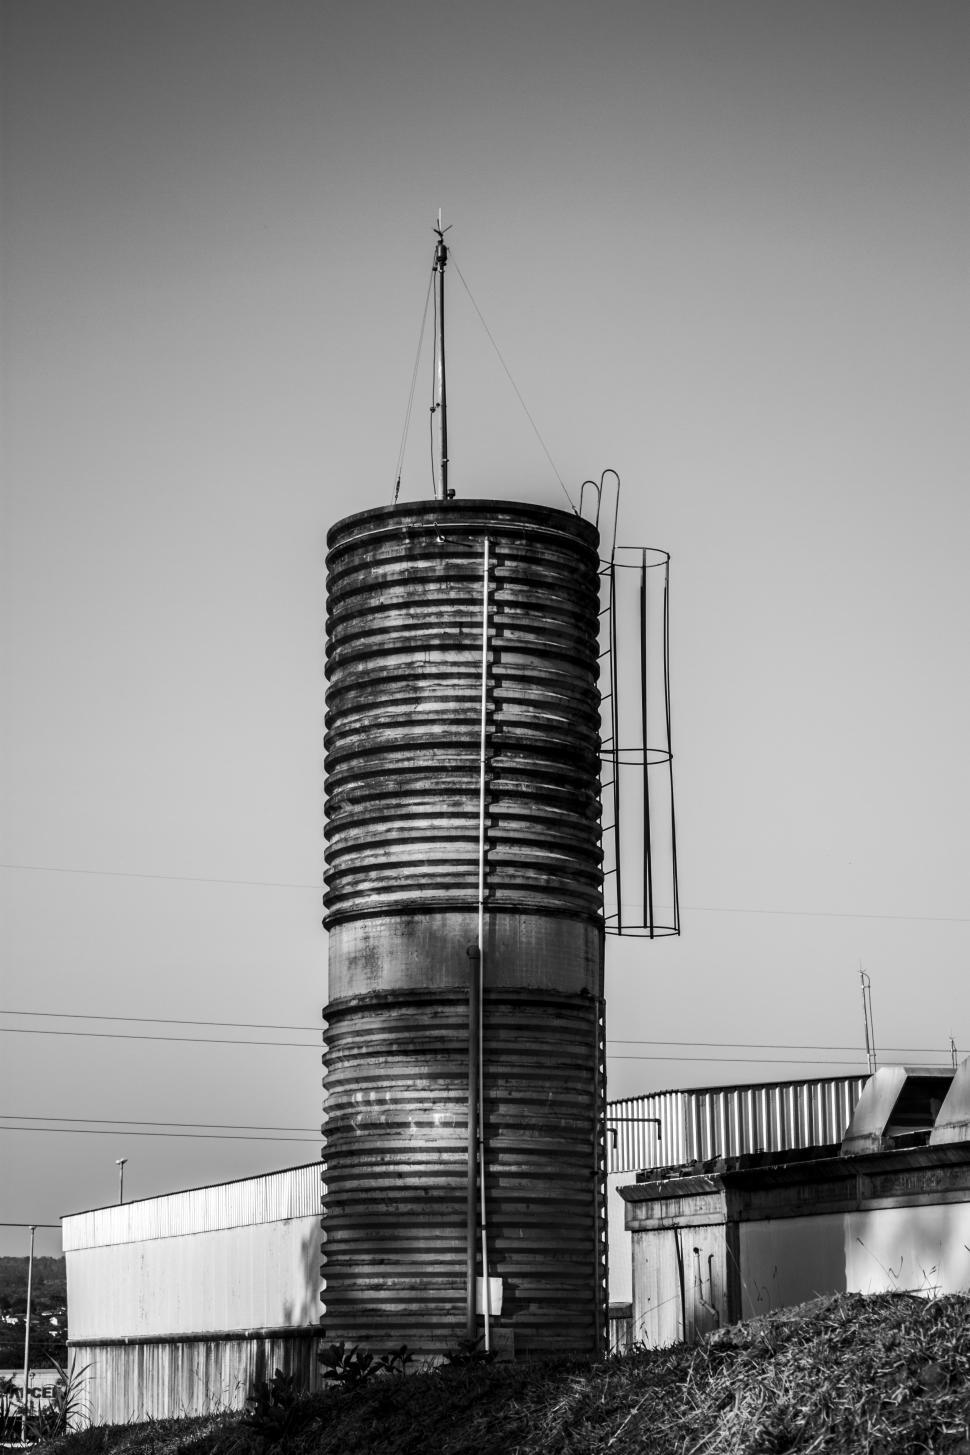 Free Image of Silo on Hill 